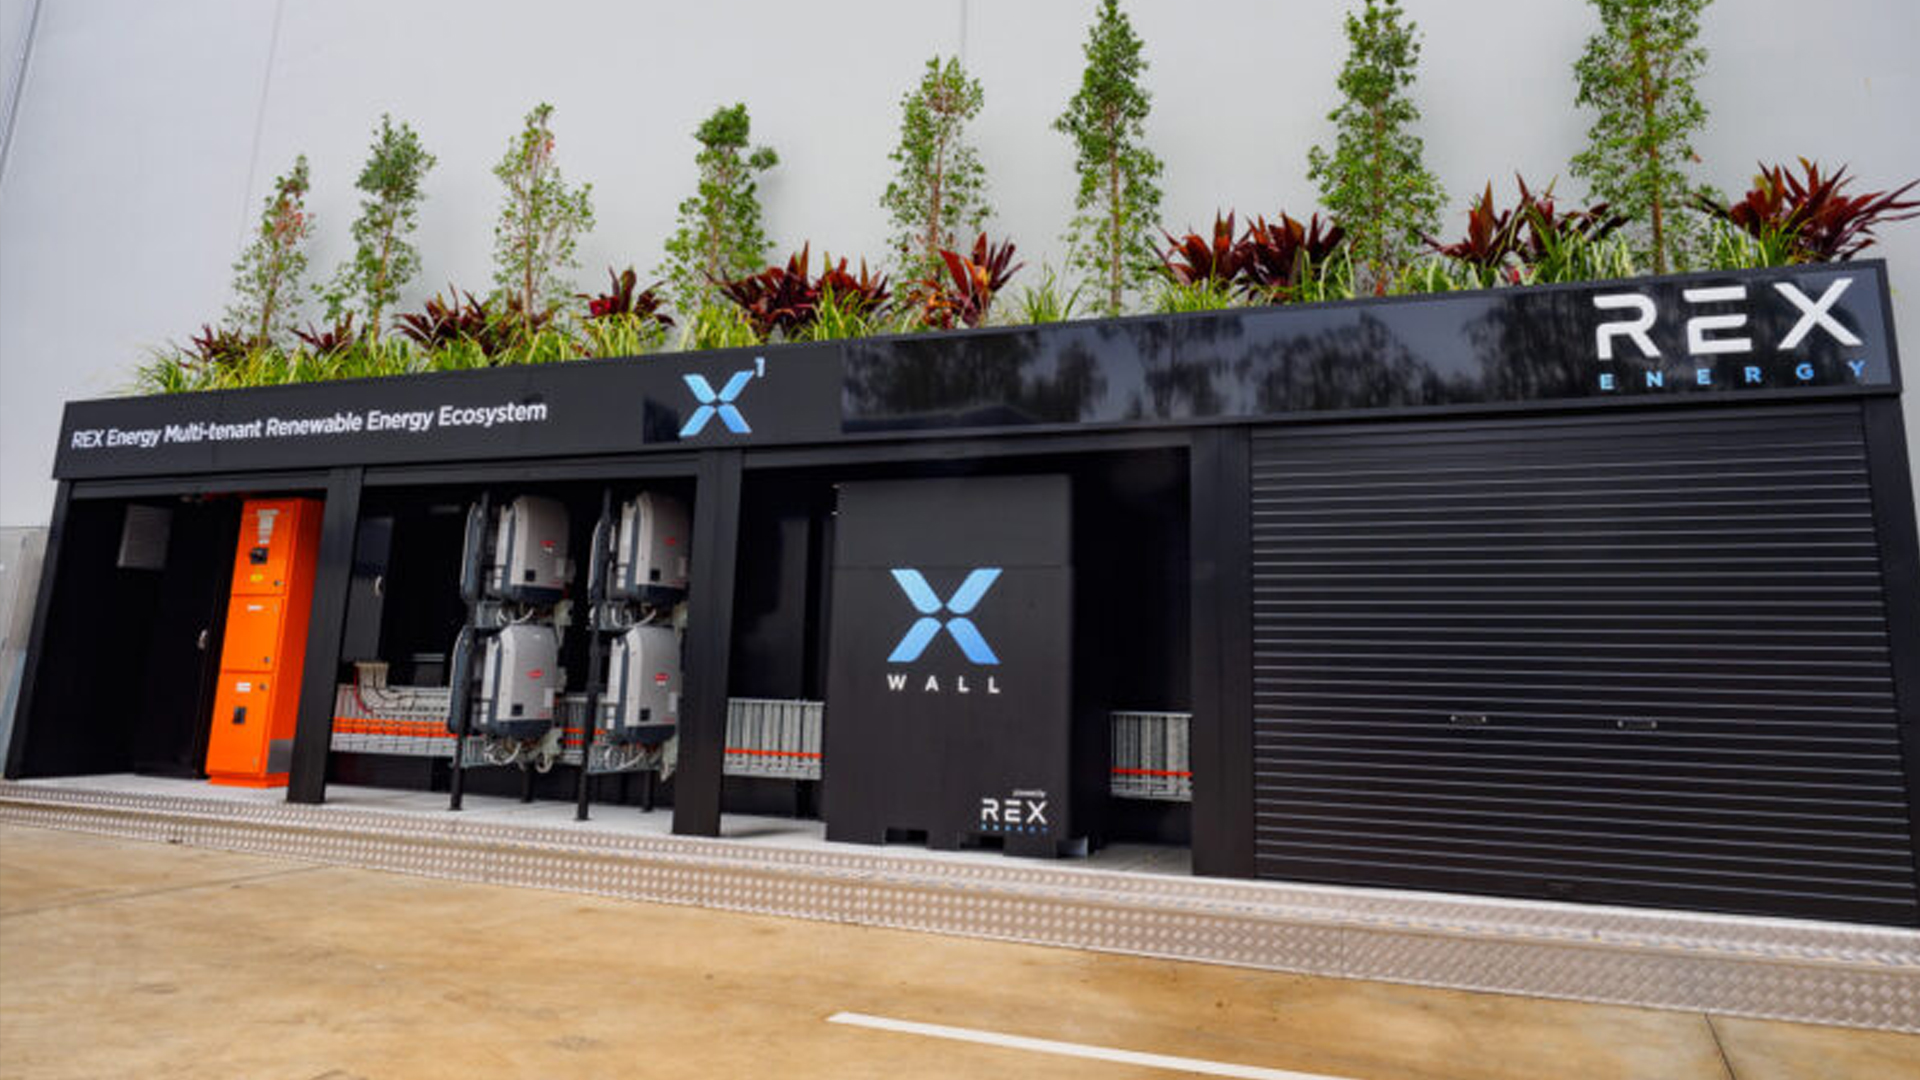 REX Energy has developed a system that will define the future of decentralised energy grids